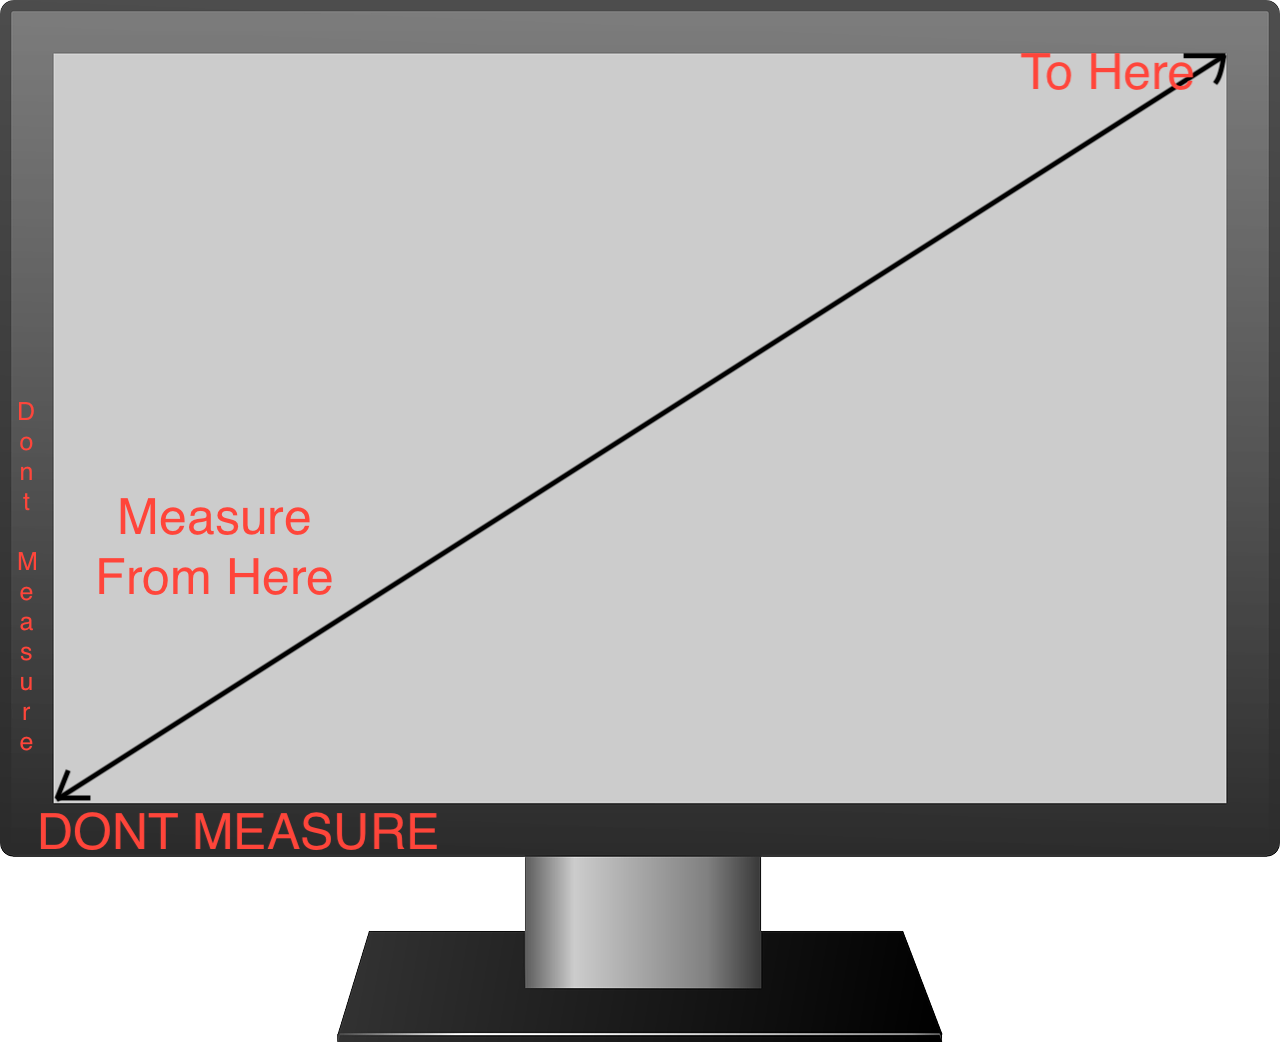 How Is a TV Measured to Determine Screen Size